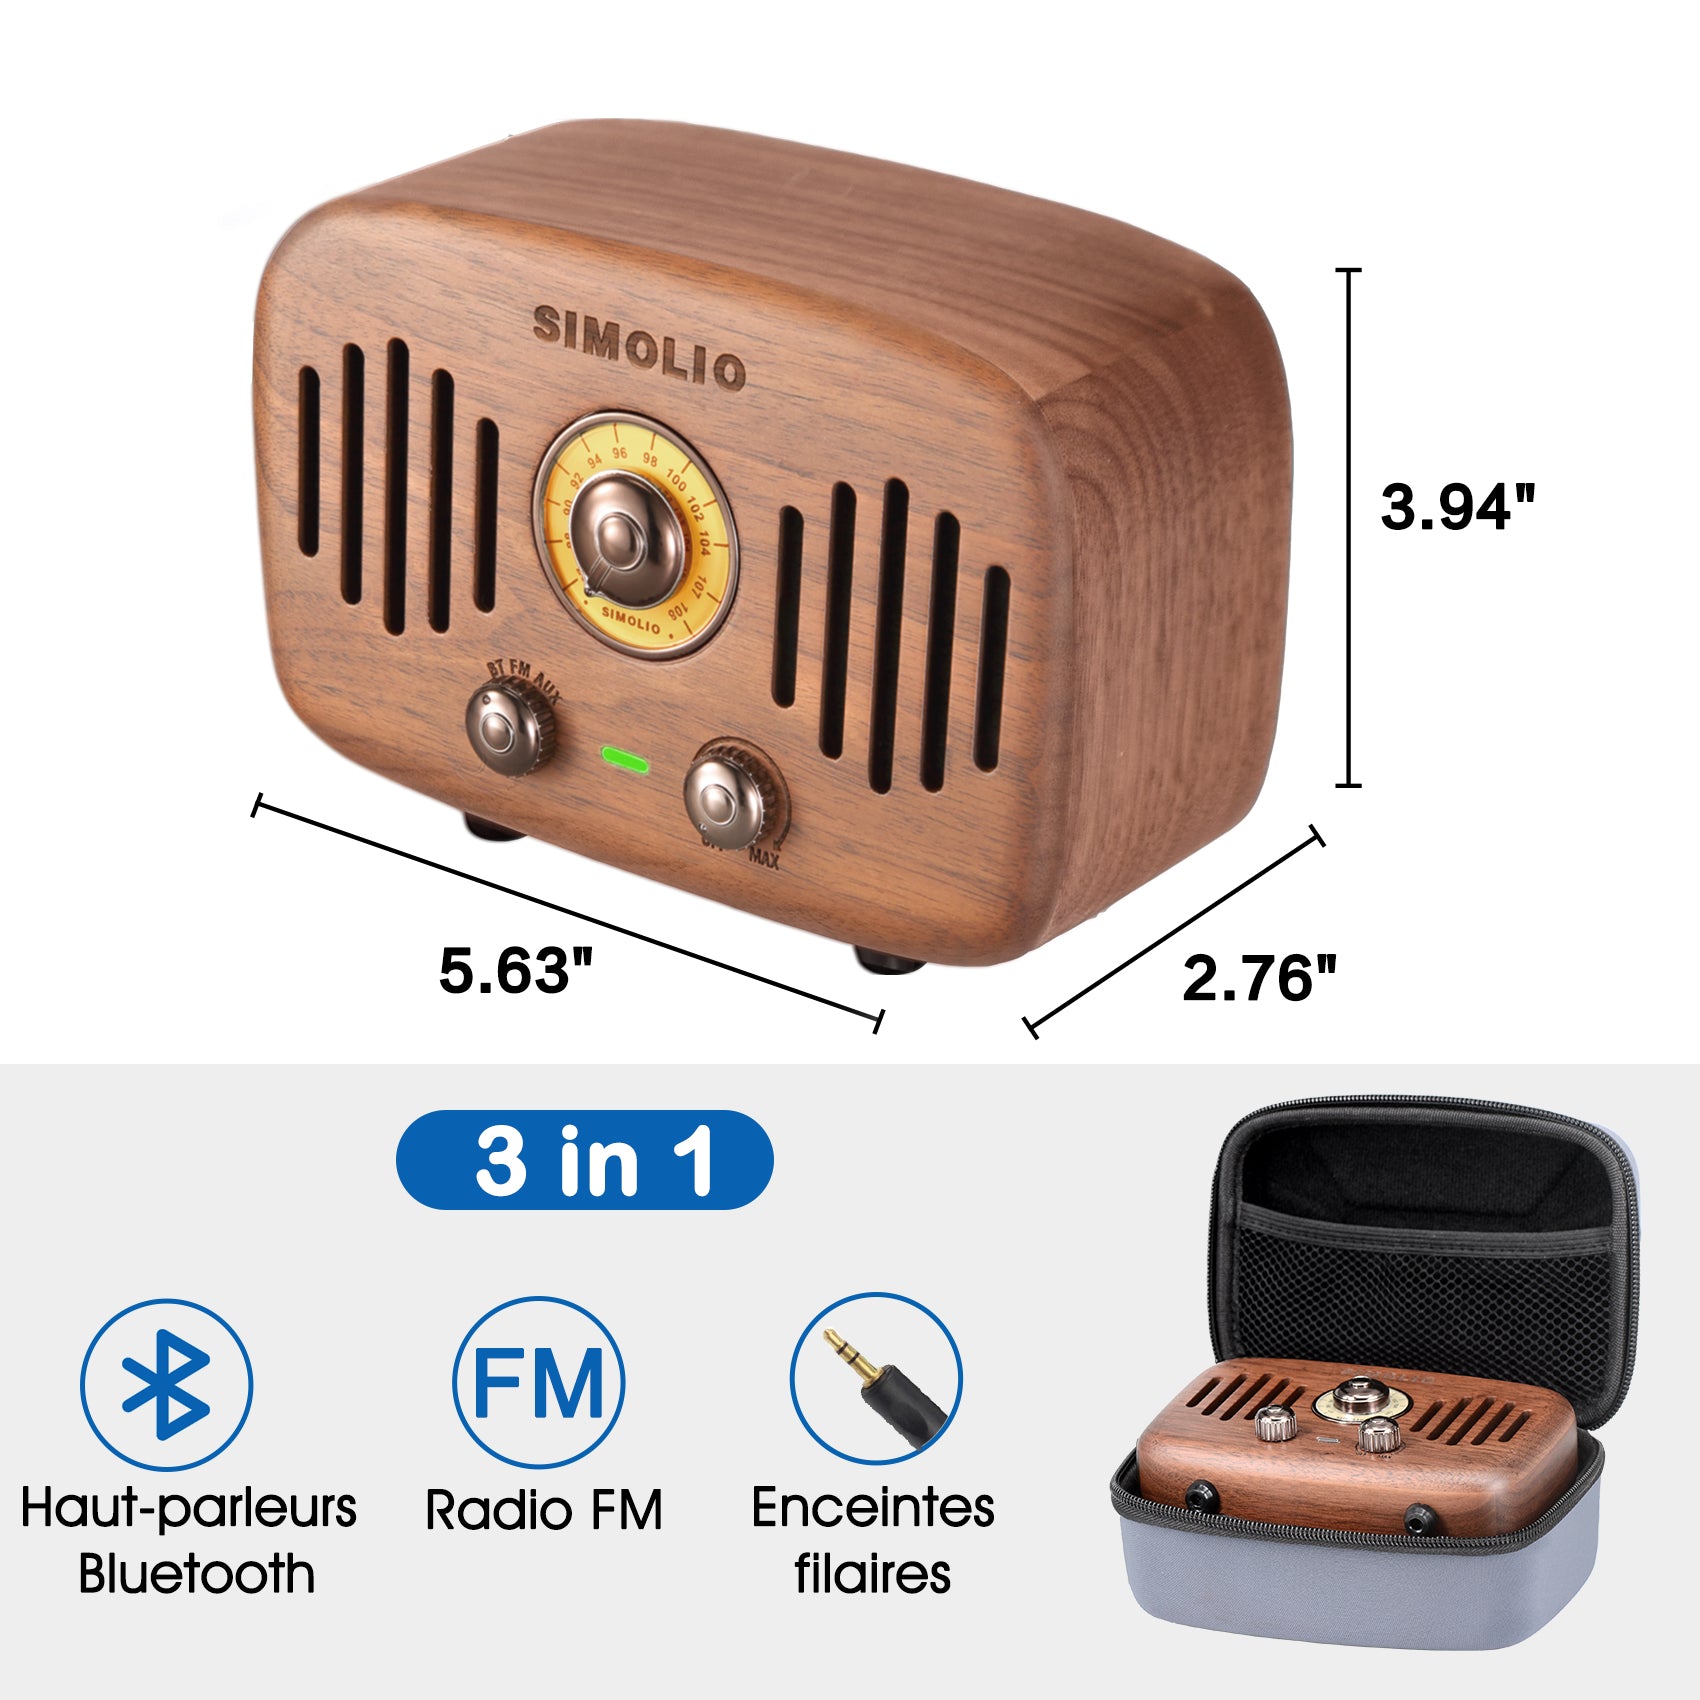 Simolio SM-762S vintage can be used as bluetooth speakers, FM radio and wired speakers